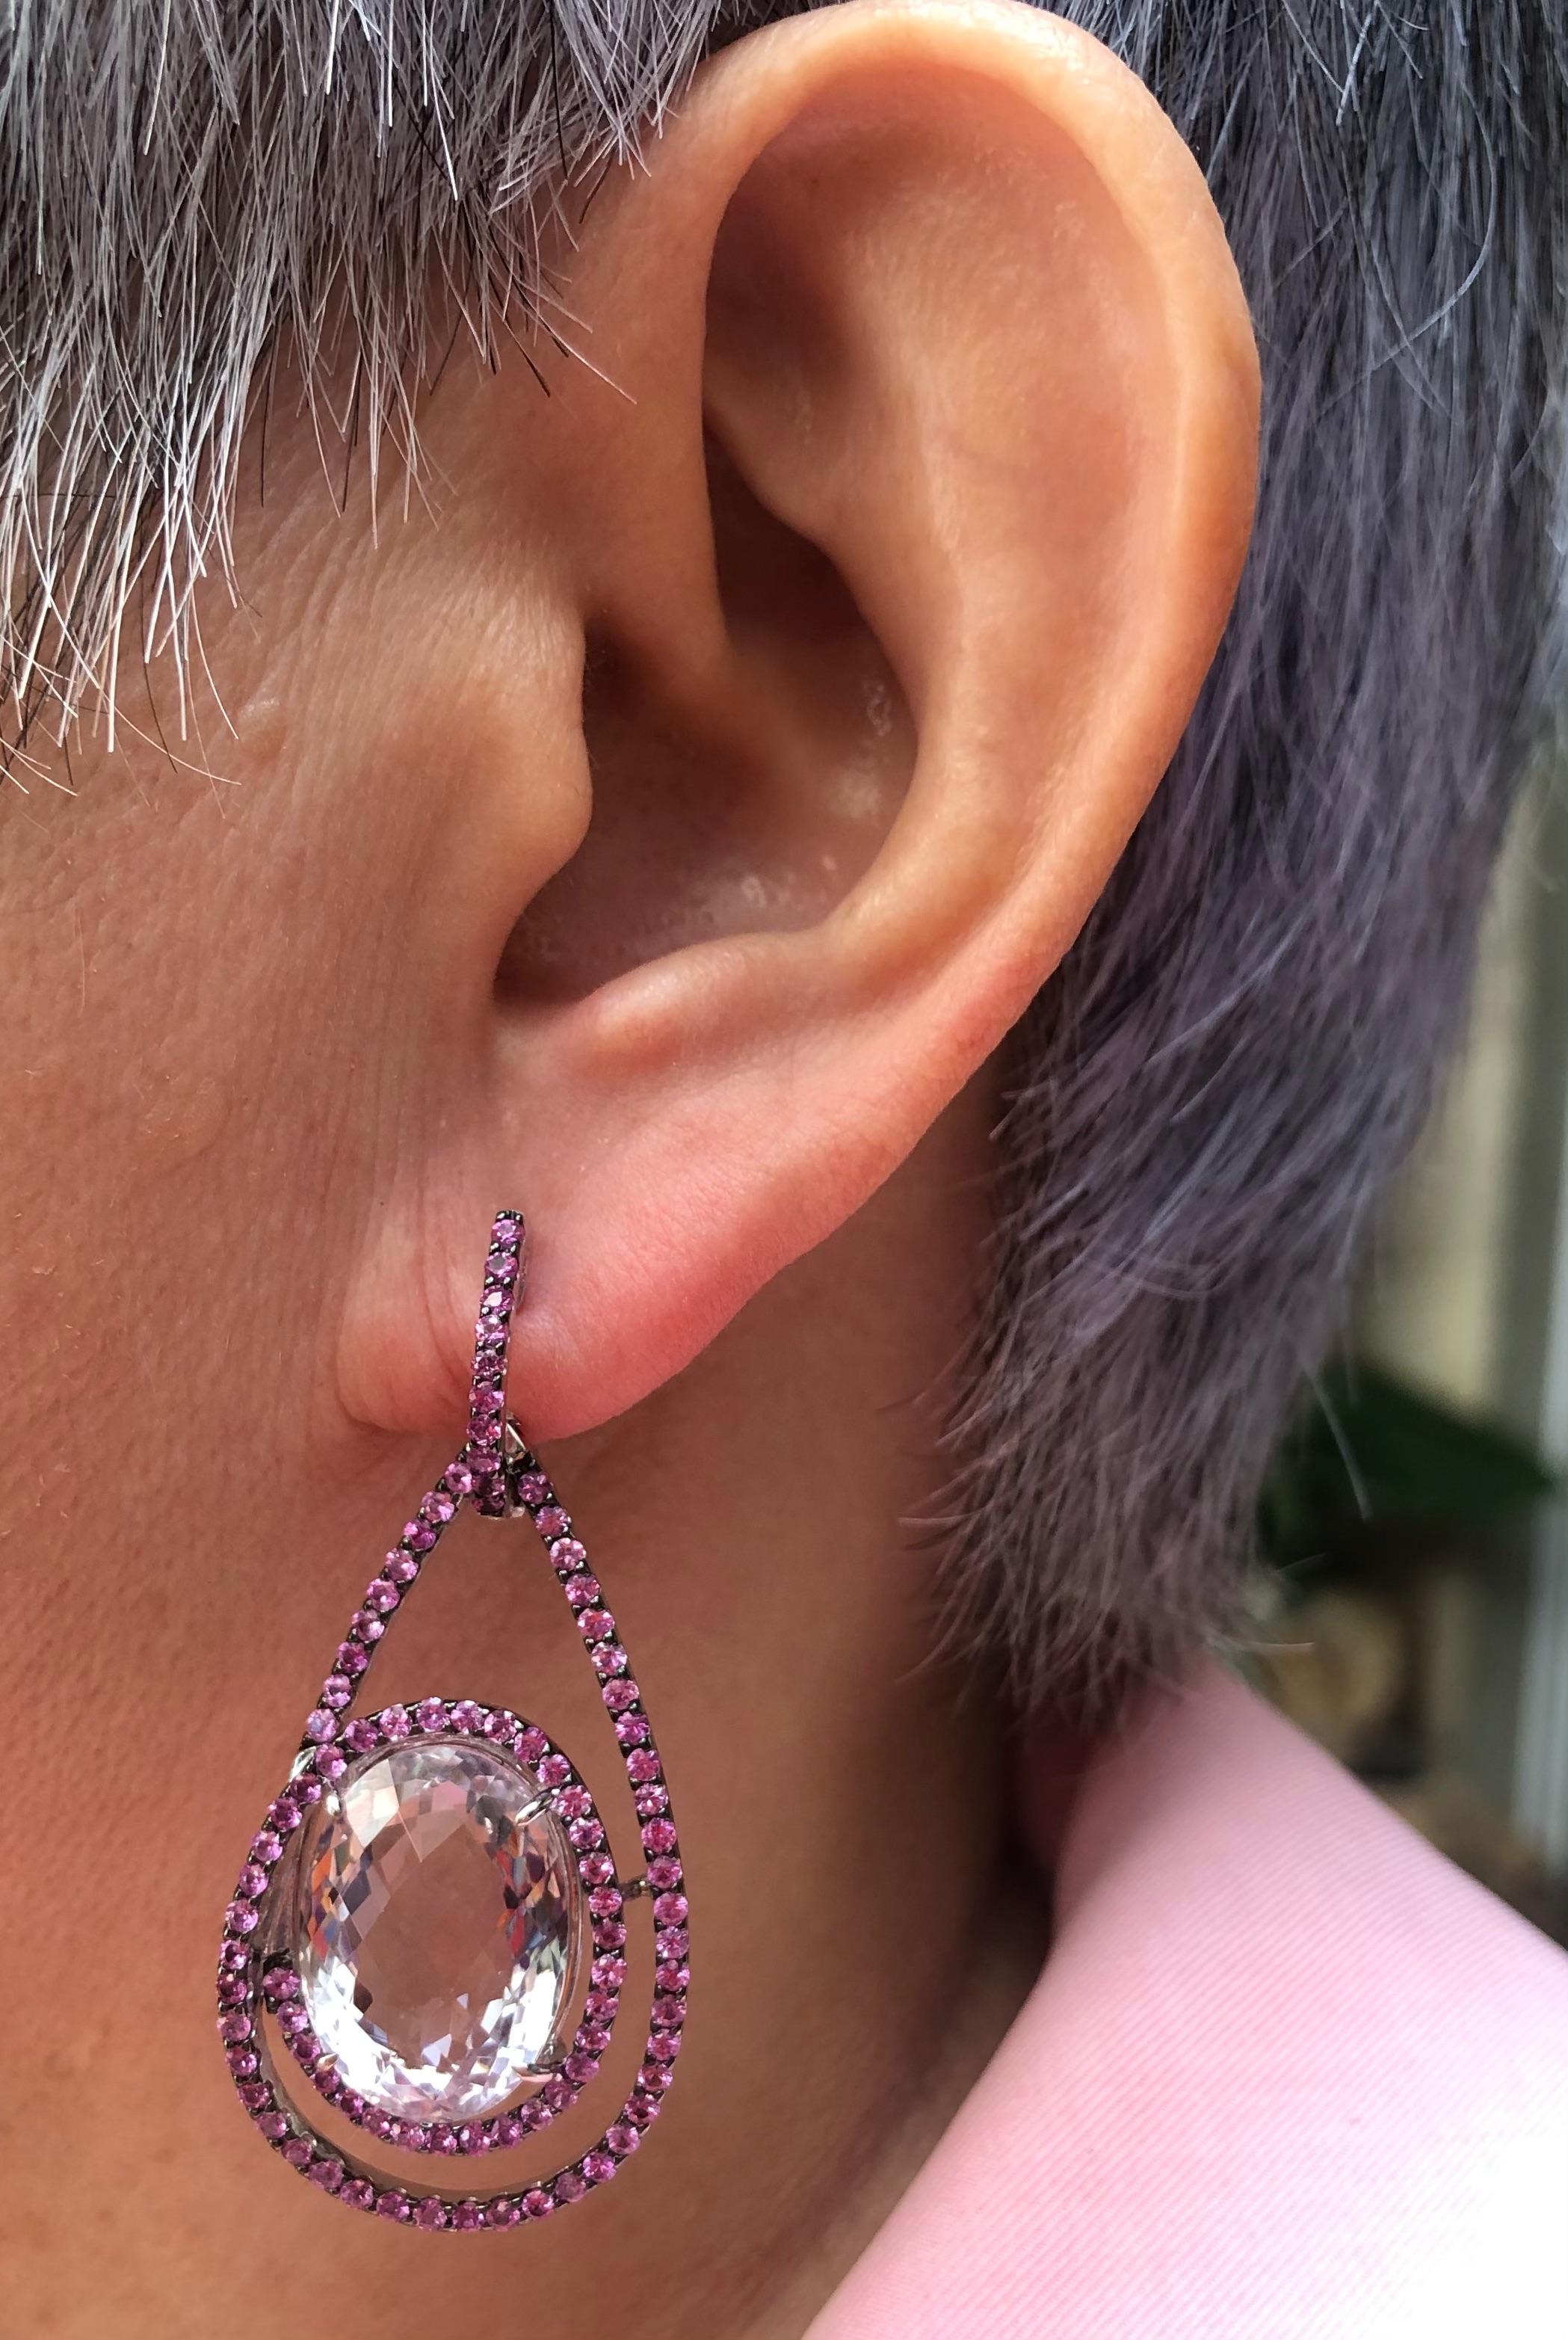 Pink Amethyst 28.86 carats with Pink Sapphire 4.35 carats Earrings set in 18 Karat White Gold Settings

Width: 2.4 cm
Length: 5.4 cm 

